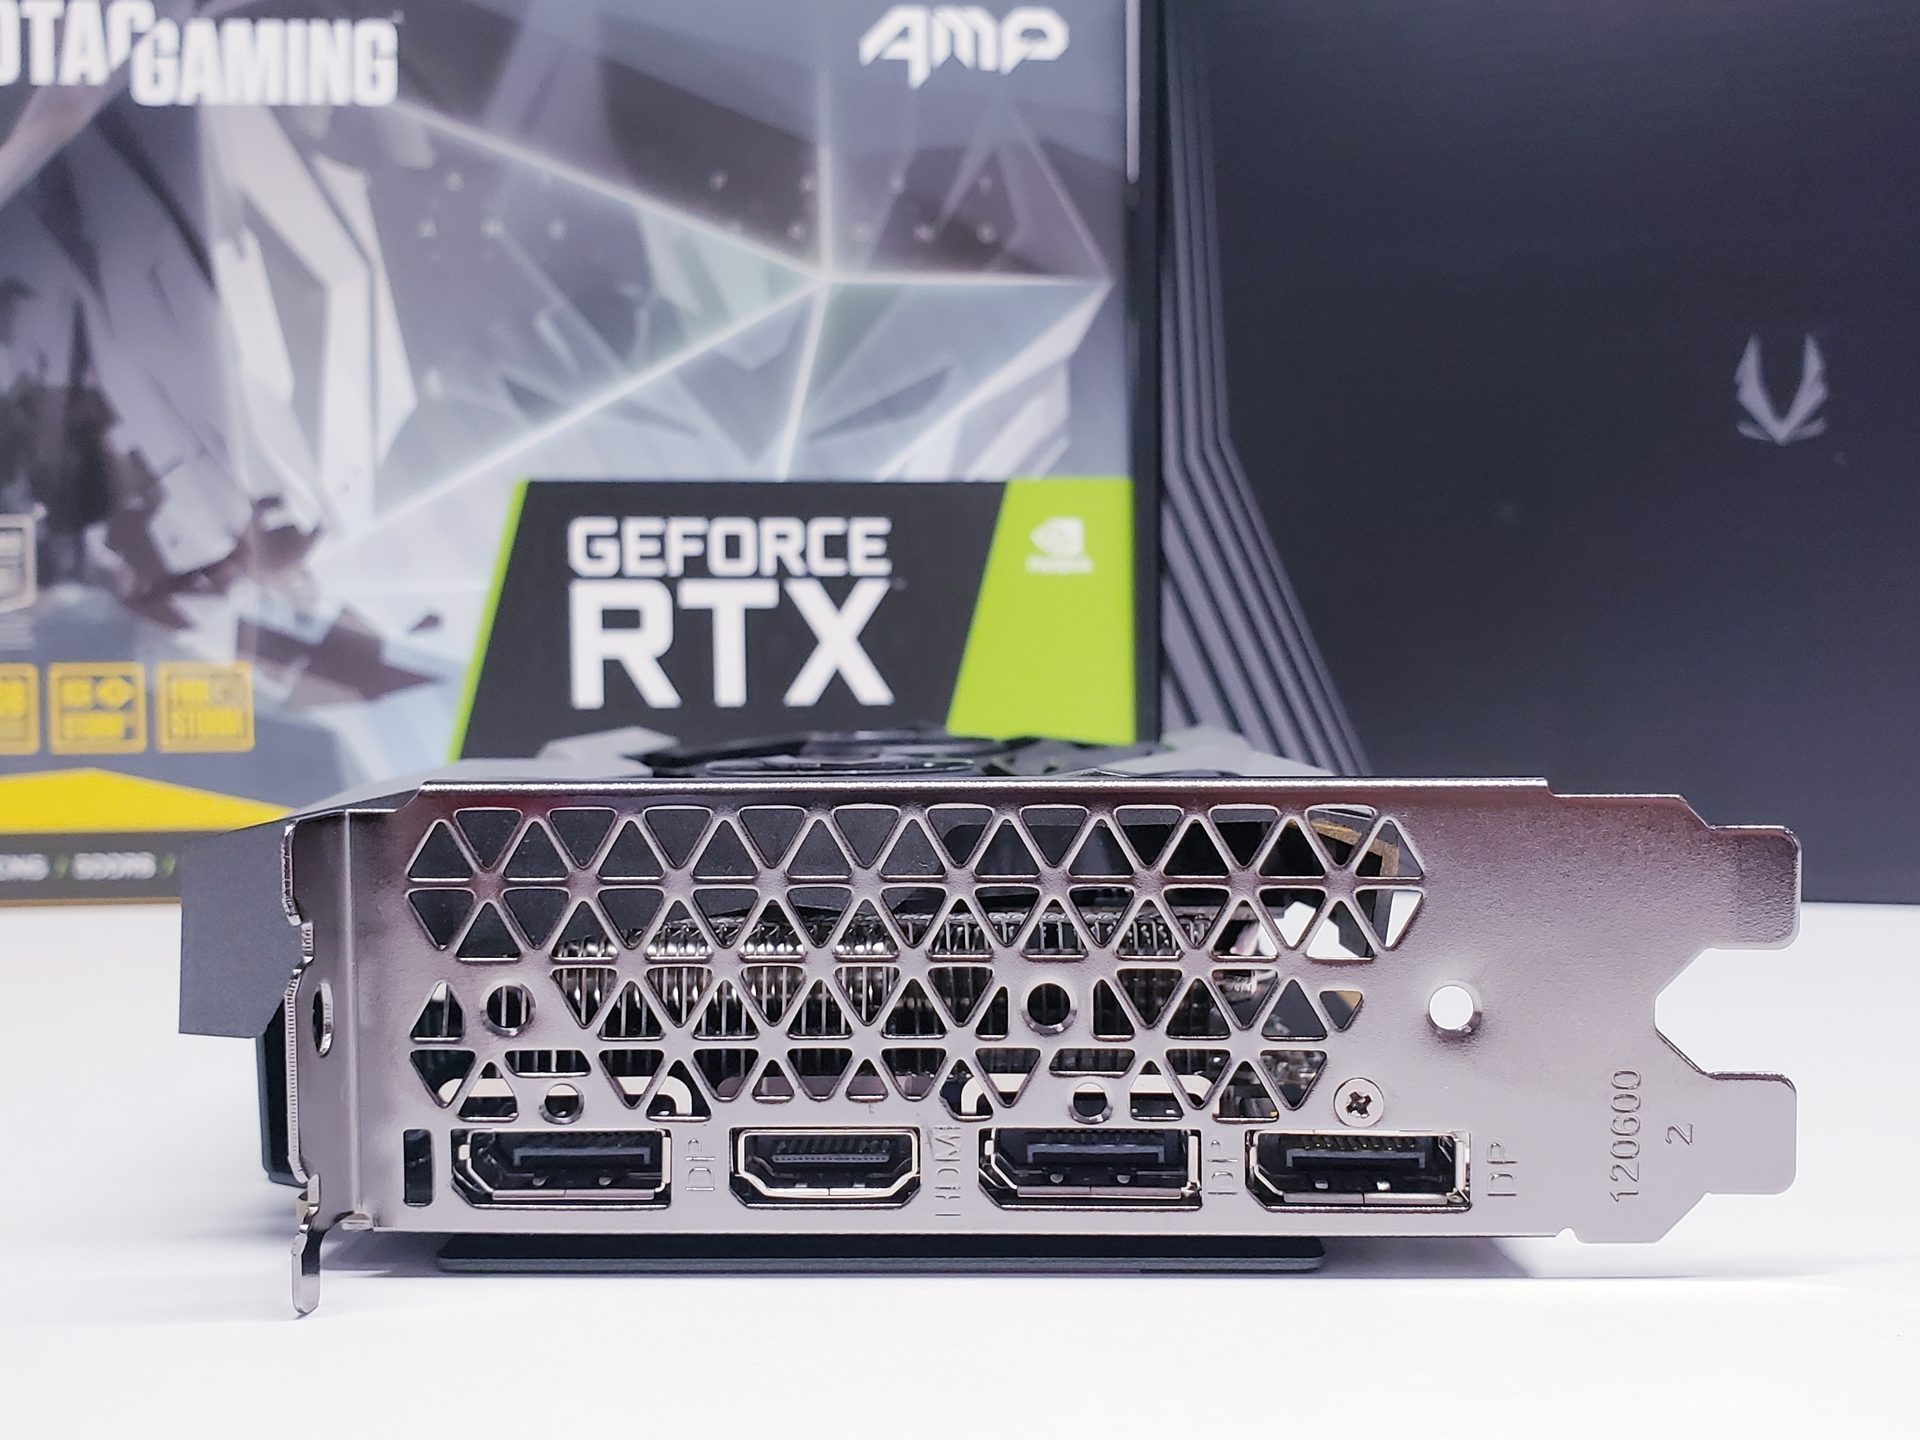 You Can Buy The Zotac Gaming Geforce Rtx 2060 Amp - Zotac Geforce Rtx 2060 Amp , HD Wallpaper & Backgrounds